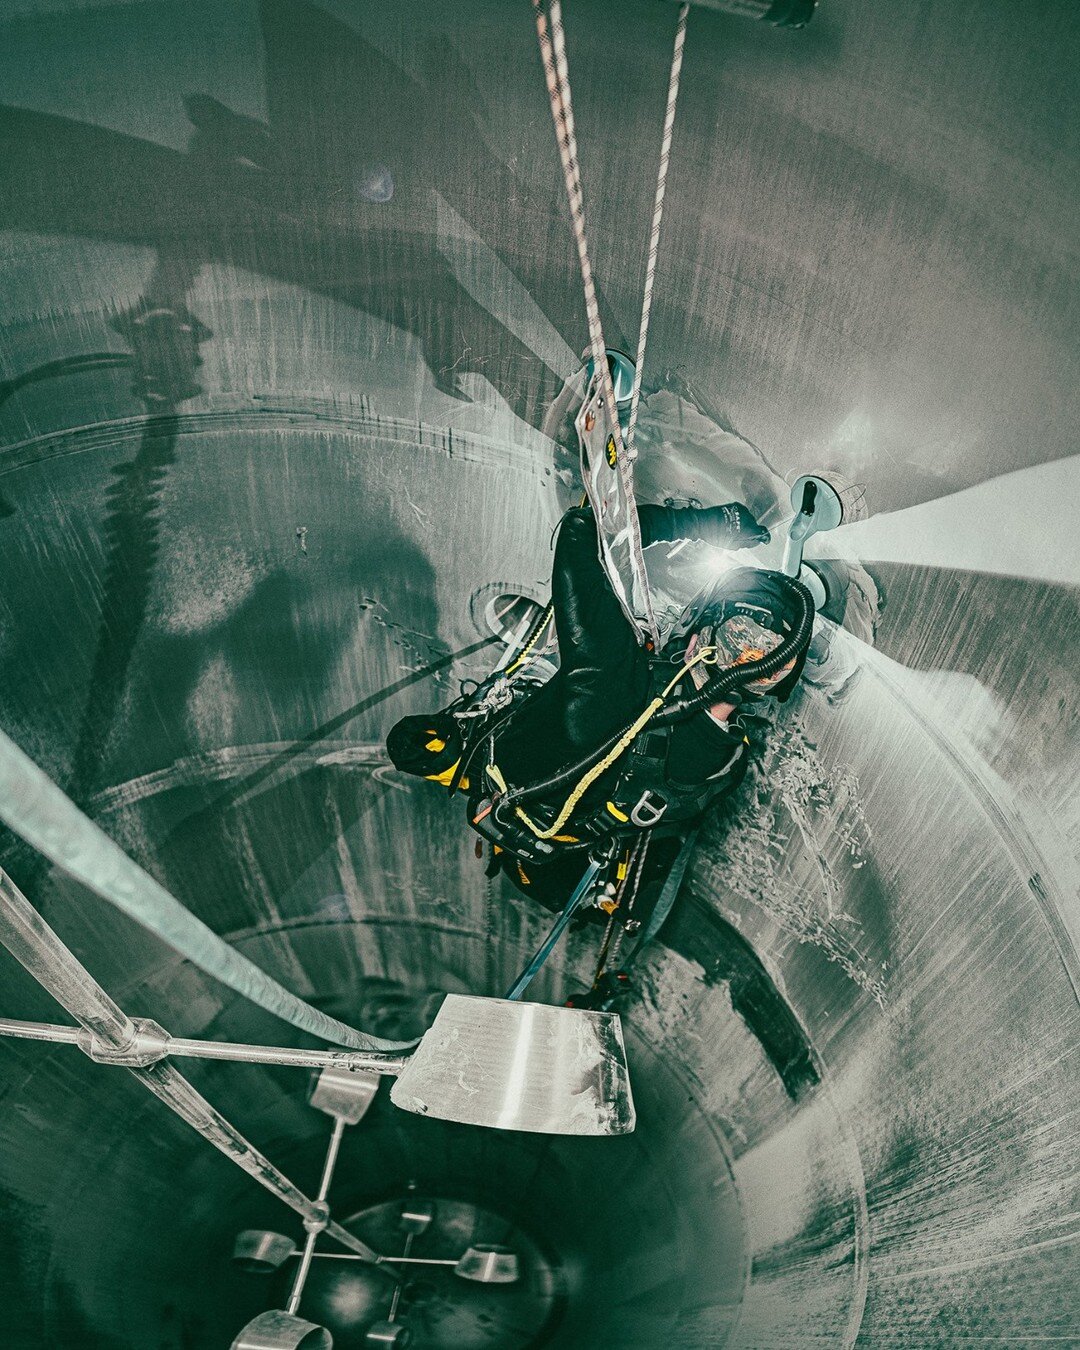 Confined space rope access welding. Rope access technician welding a leaking tank.

HDR Pano but IG won't let me show the full size photo.

Shot on Sony A7III 24mm F1.4

#photography #photographer #photooftheday  #instagood #instagram #photo #picofth